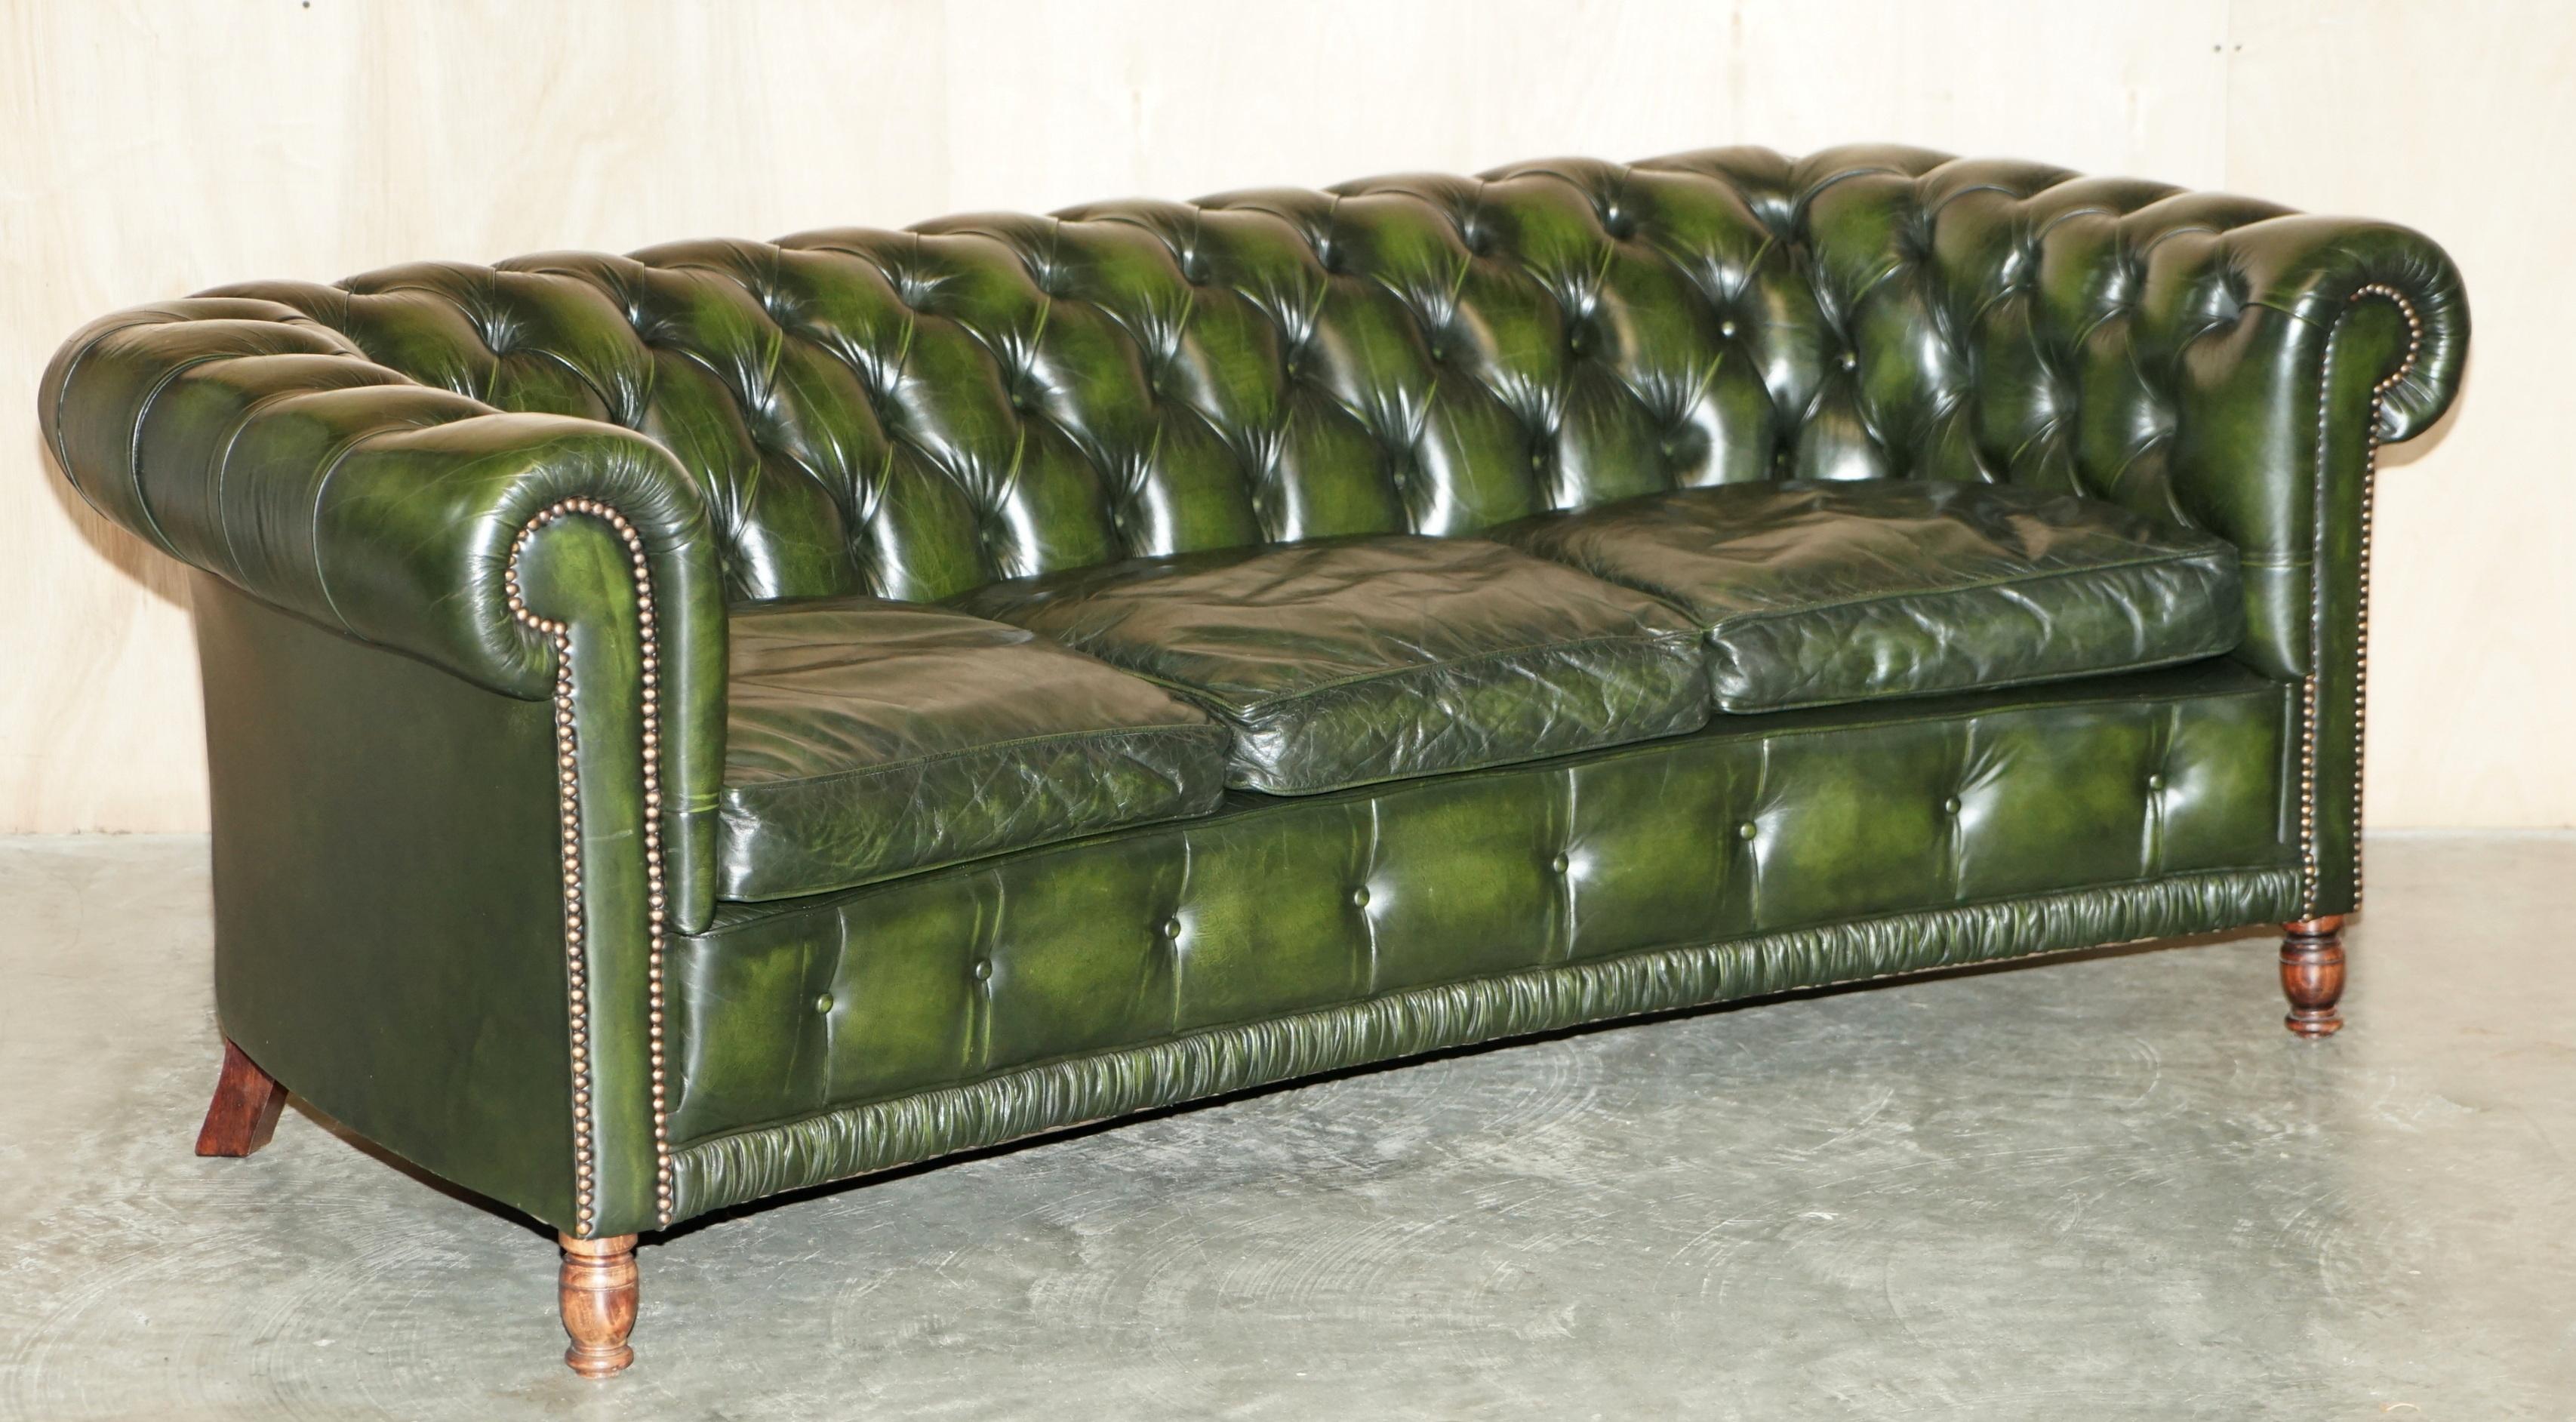 We are delighted to offer for sale this stunning pair of lightly restored vintage Regency Green leather, serpentine fronted Chesterfield Tufted club sofas after Howard & Son's of Berners Street.

These sofas are absolutely stunning, in the ever